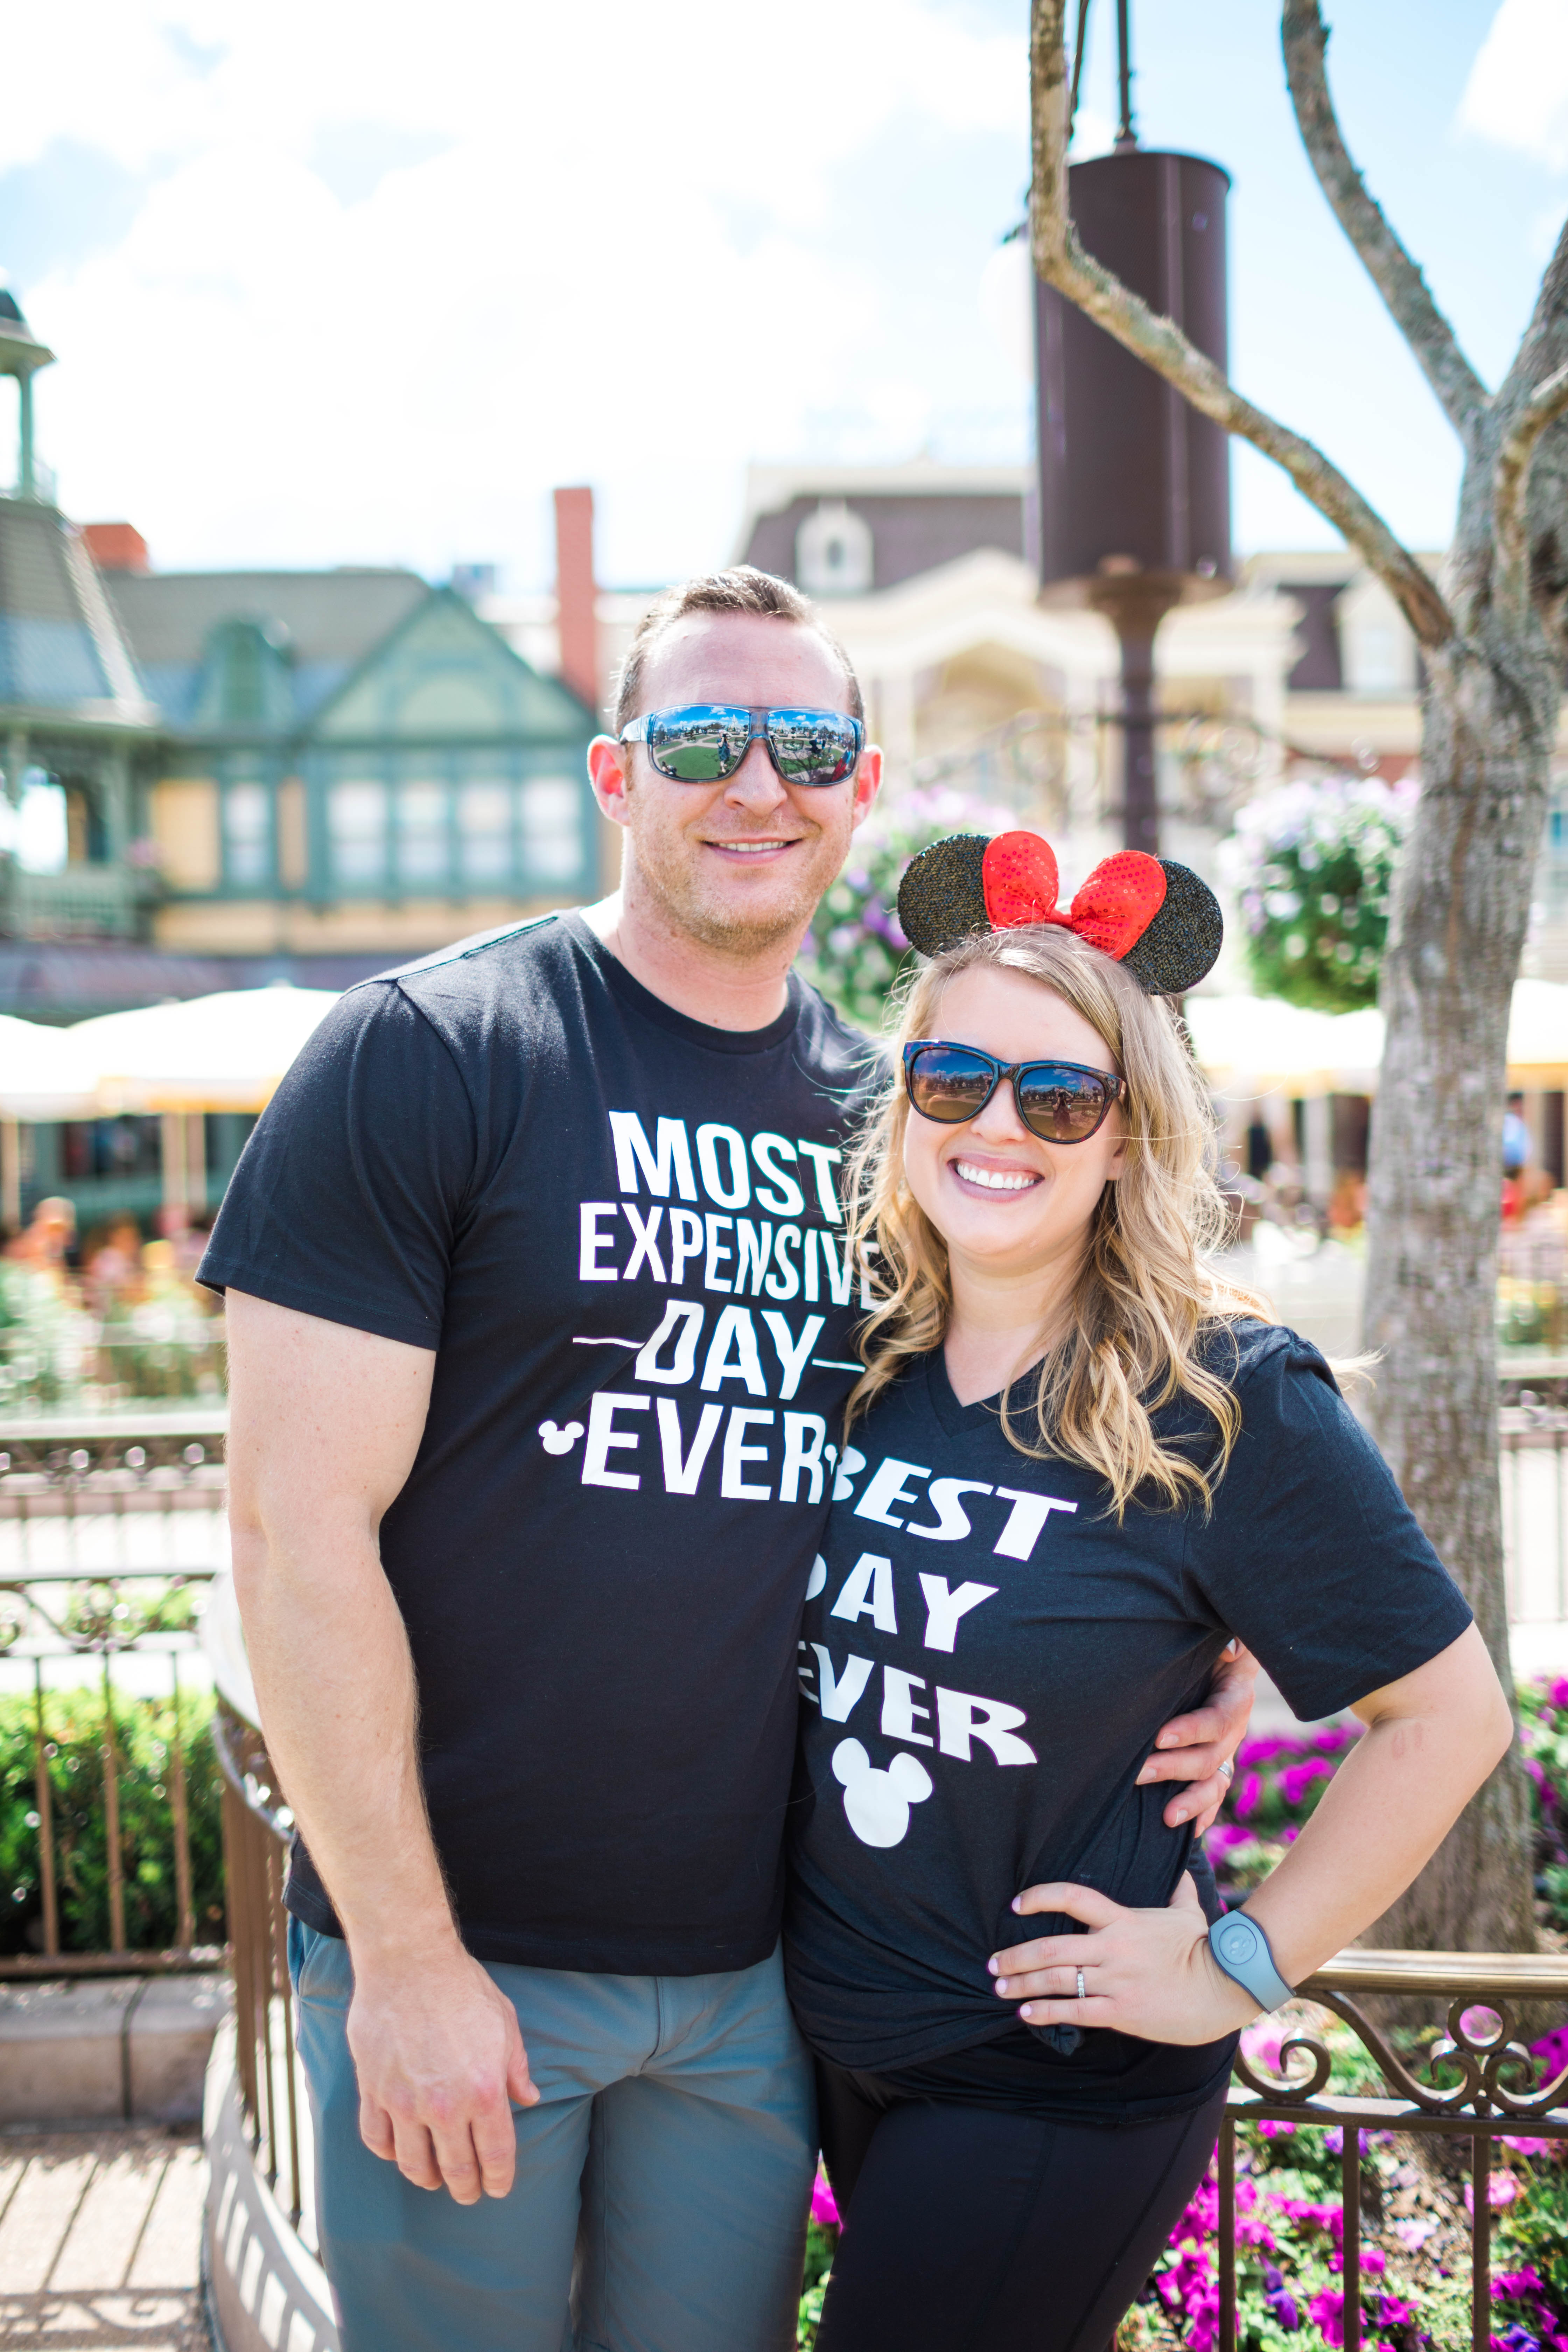 Funny Disney Shirts for Families